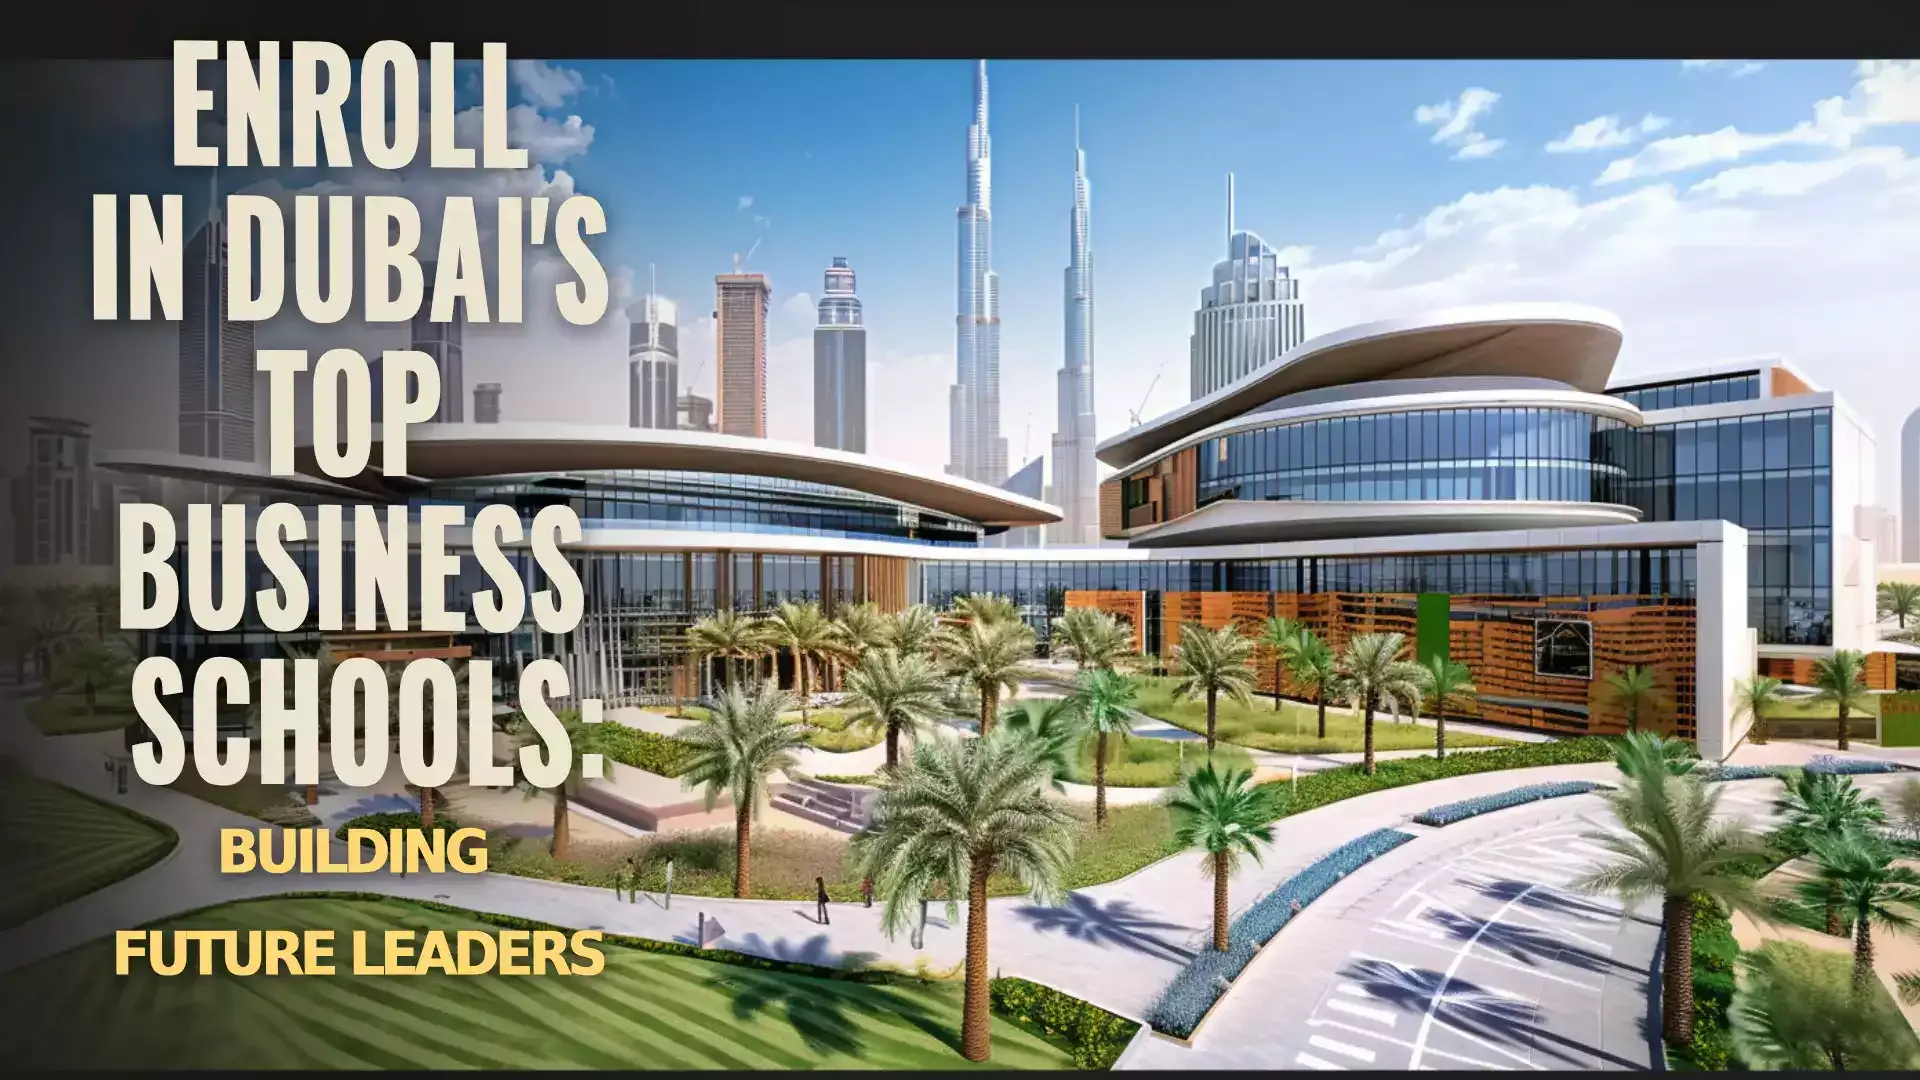 A prestigious business school building in Dubai, symbolizing academic excellence and career advancement opportunities